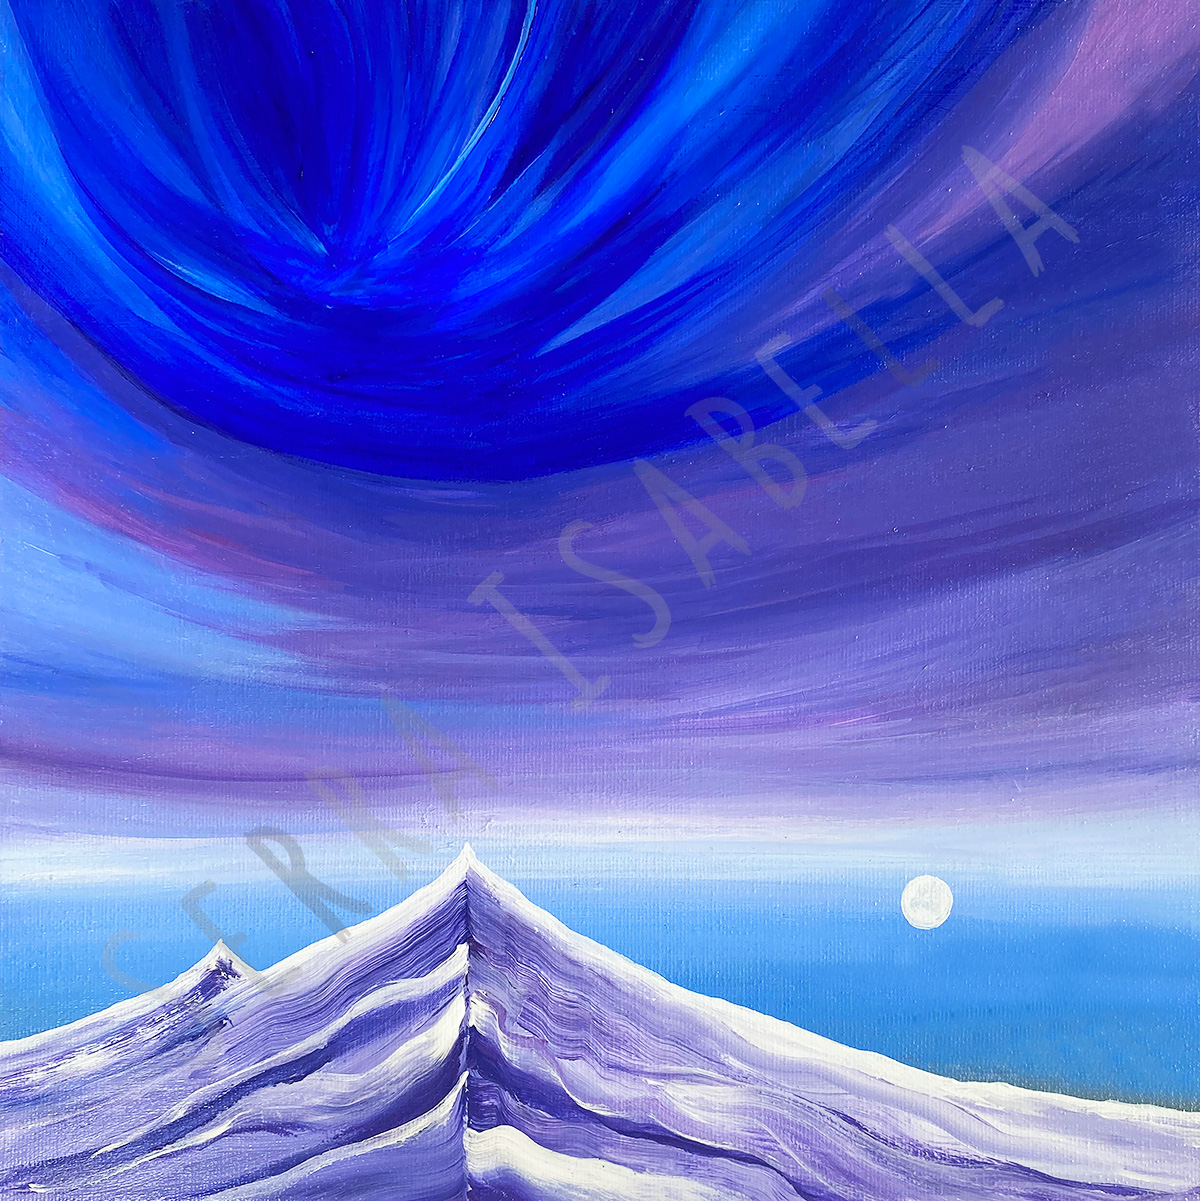 Painting of a little moon beside the mountain of lavender streaks just below an extravagant upturned sky.